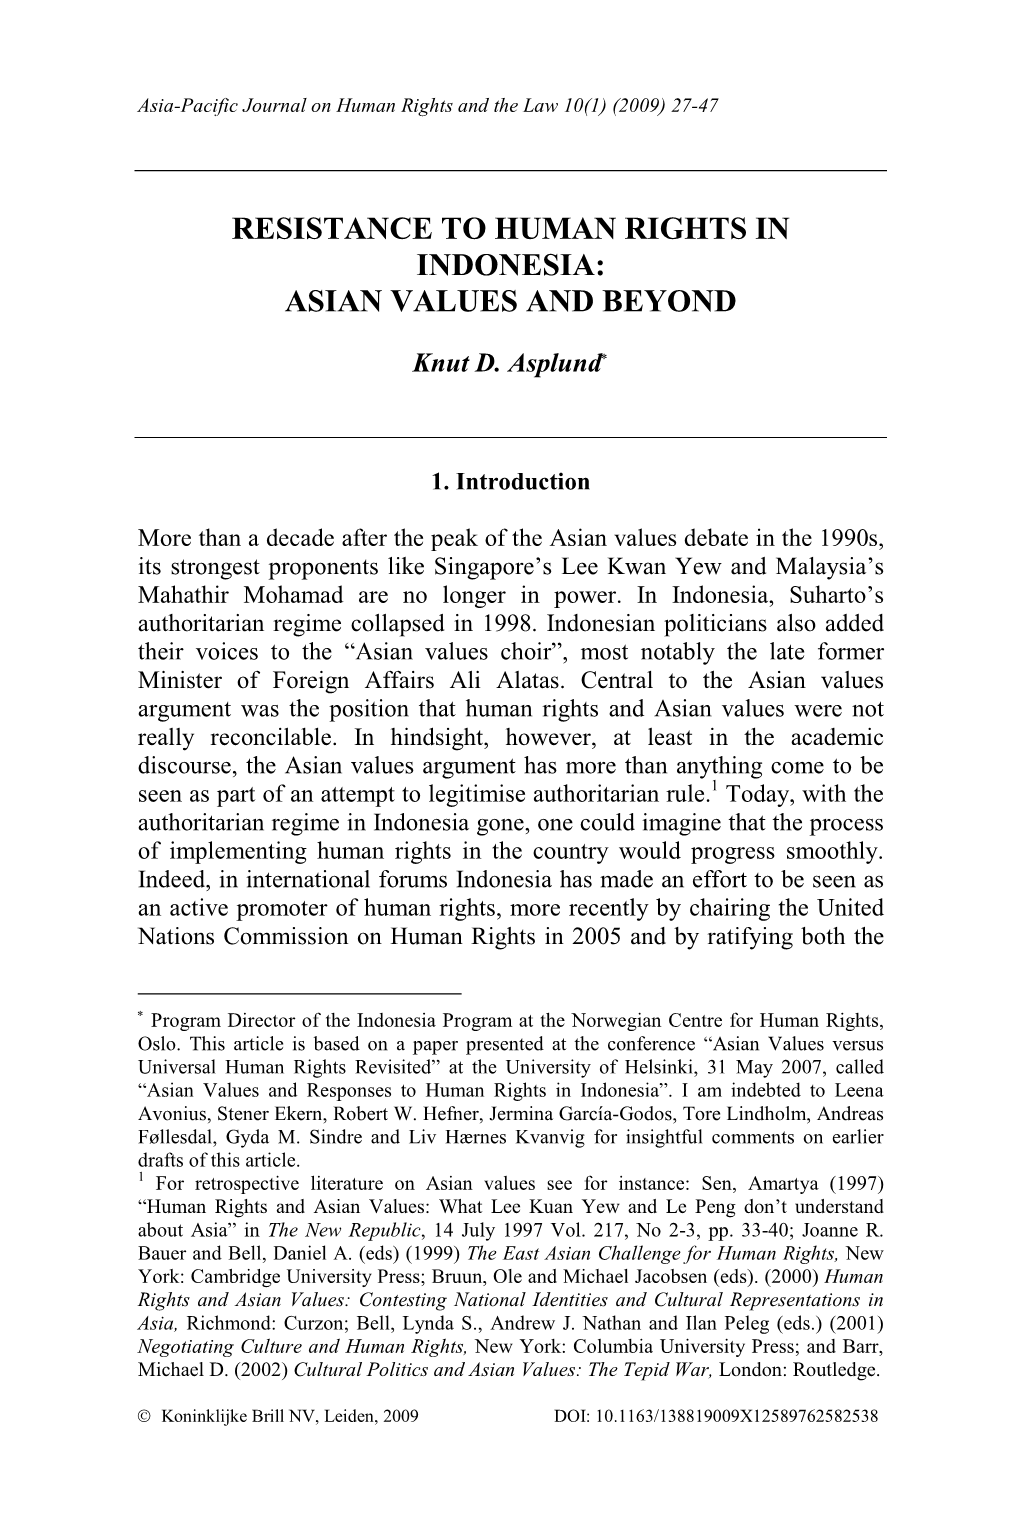 Resistance to Human Rights in Indonesia: Asian Values and Beyond